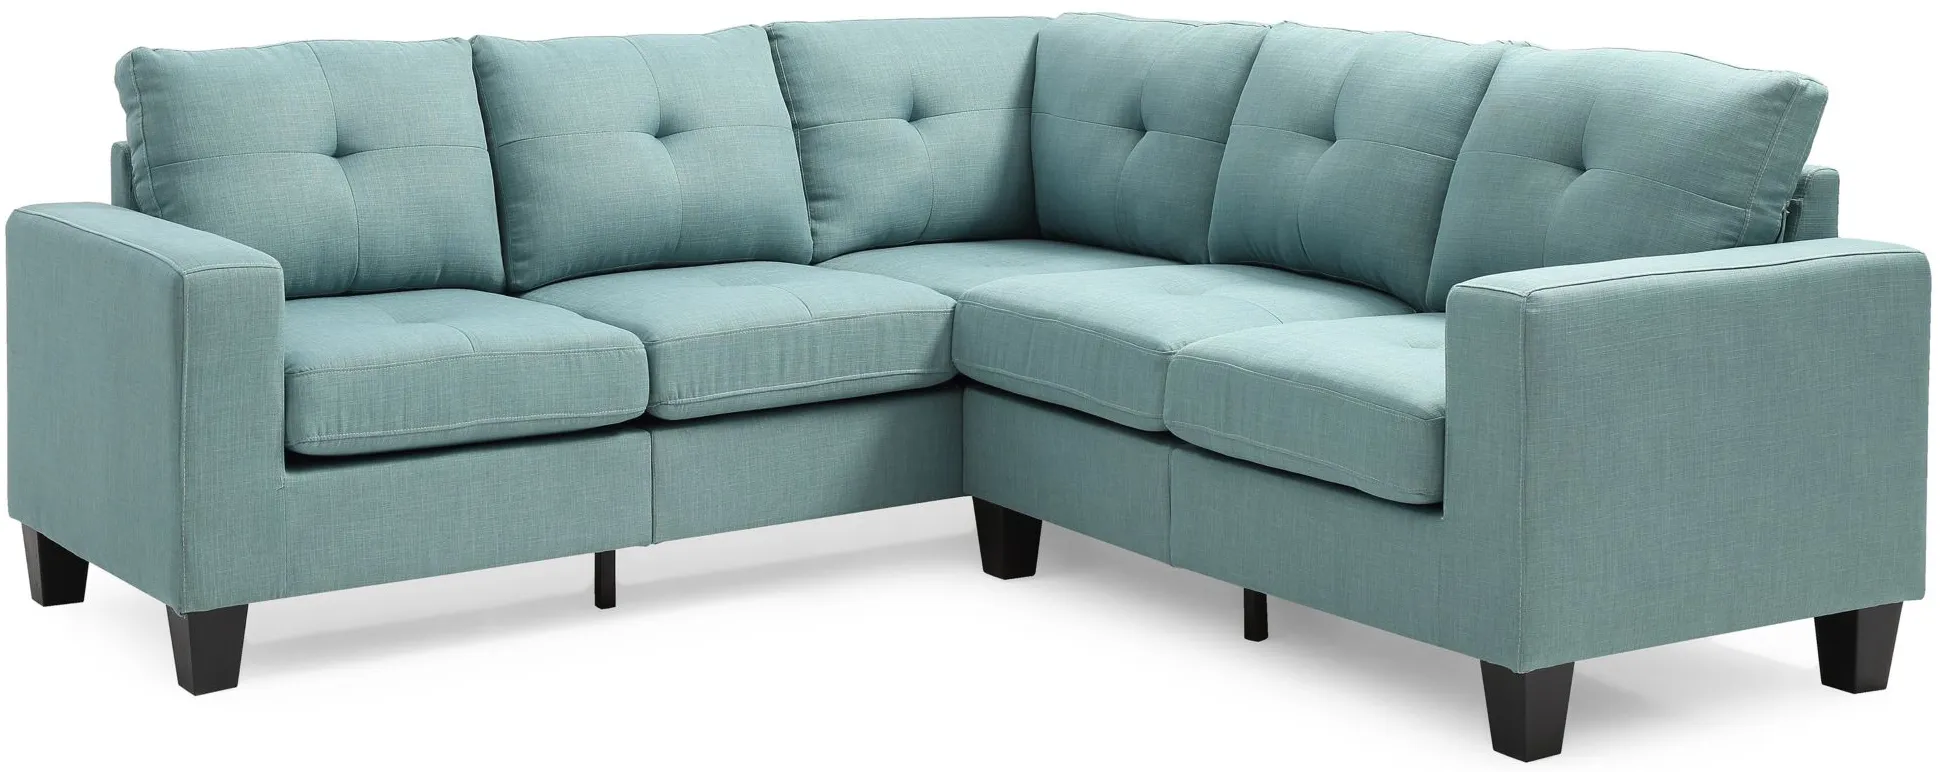 Newbury Sectional Sofa in Teal by Glory Furniture